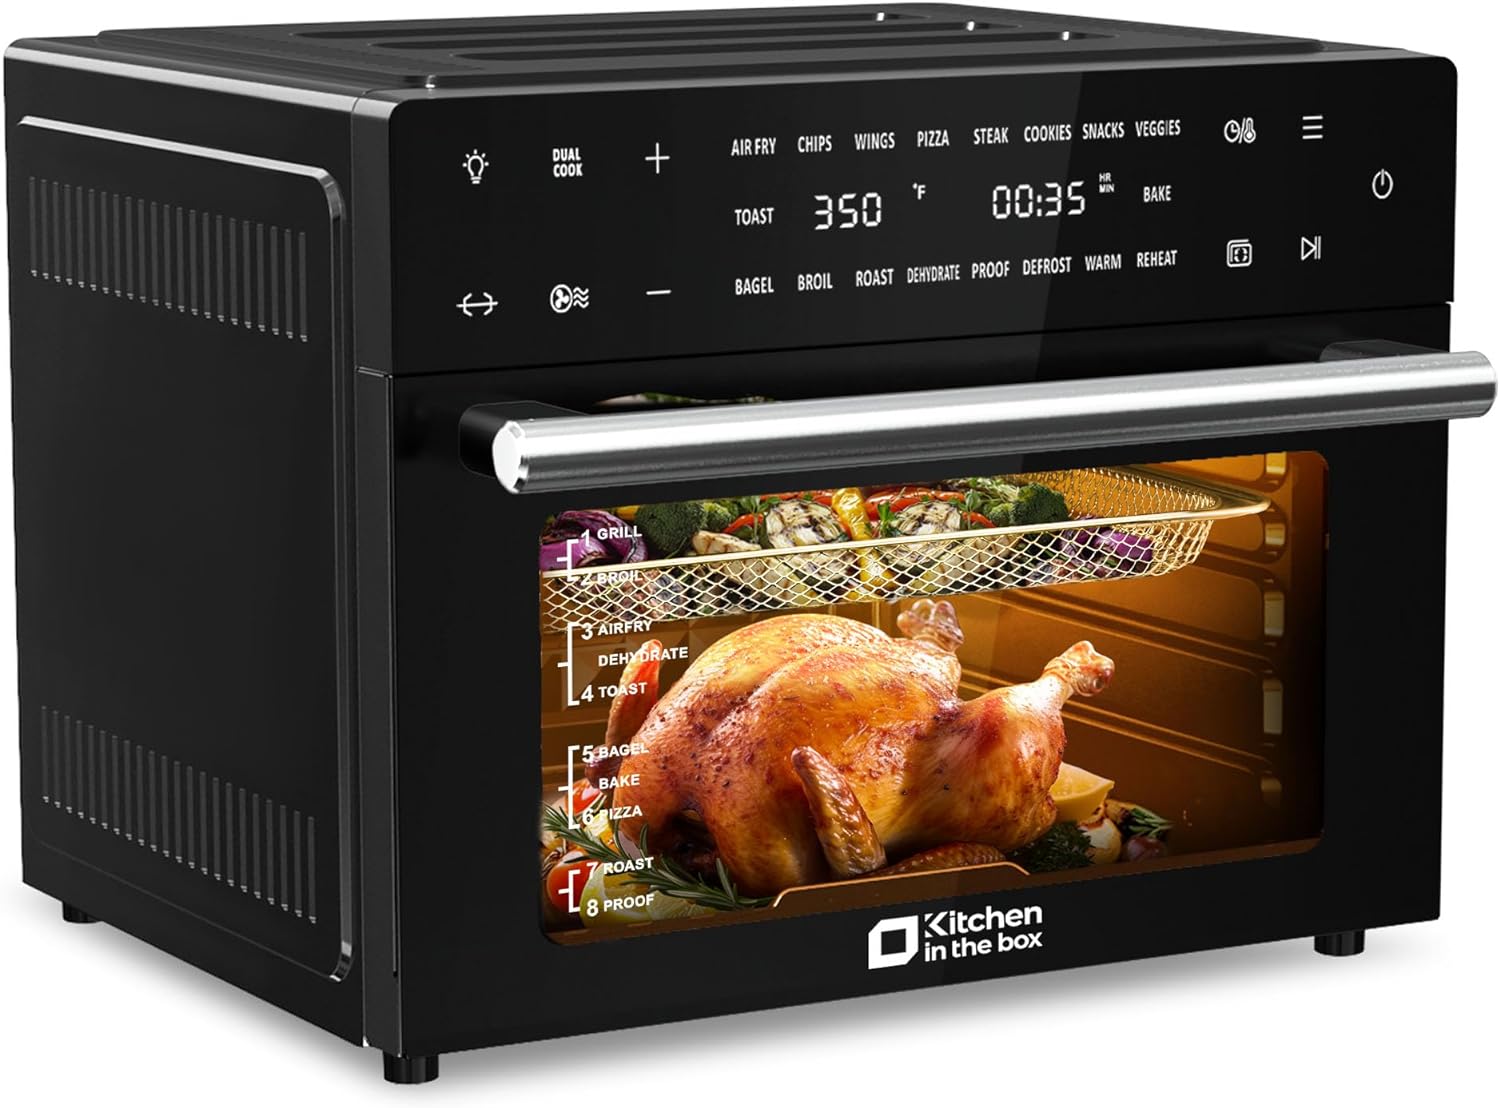 Special Discounts Available! 32 QT Digital Toaster Oven Air Fryer Combo - Shop Now and Save Big